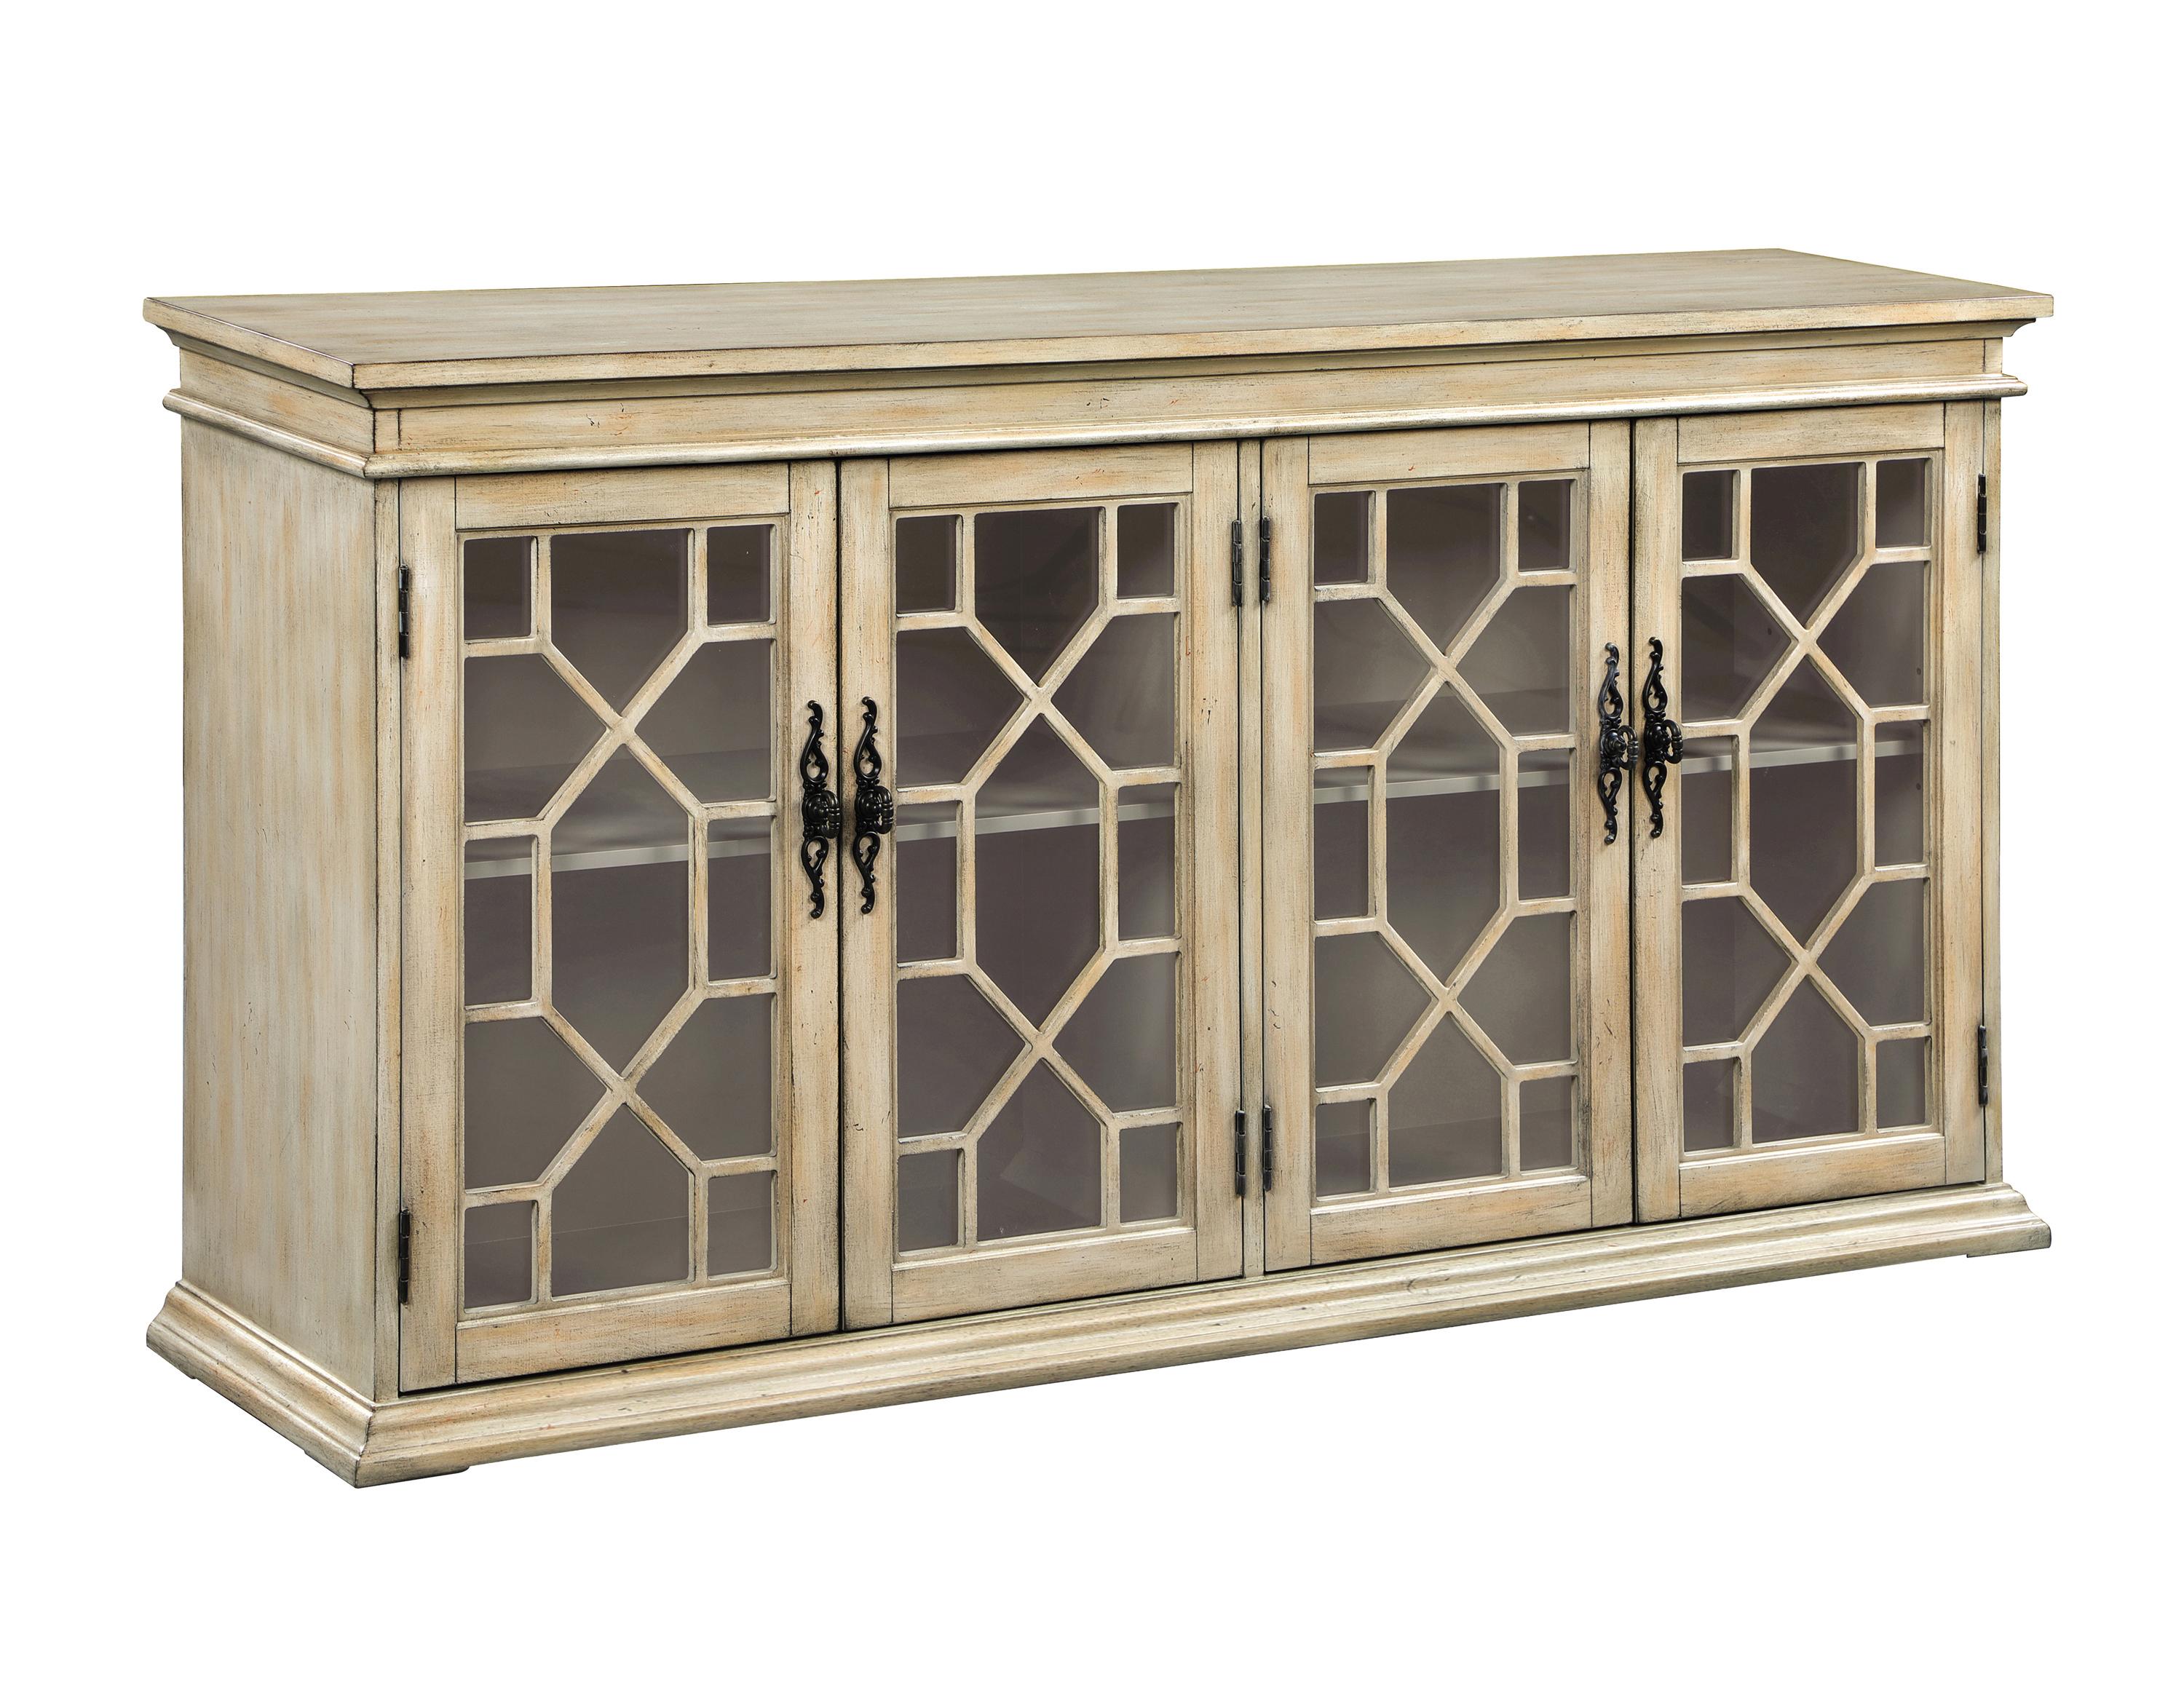 Transitional Accent Cabinet 950858 950858 in Natural 